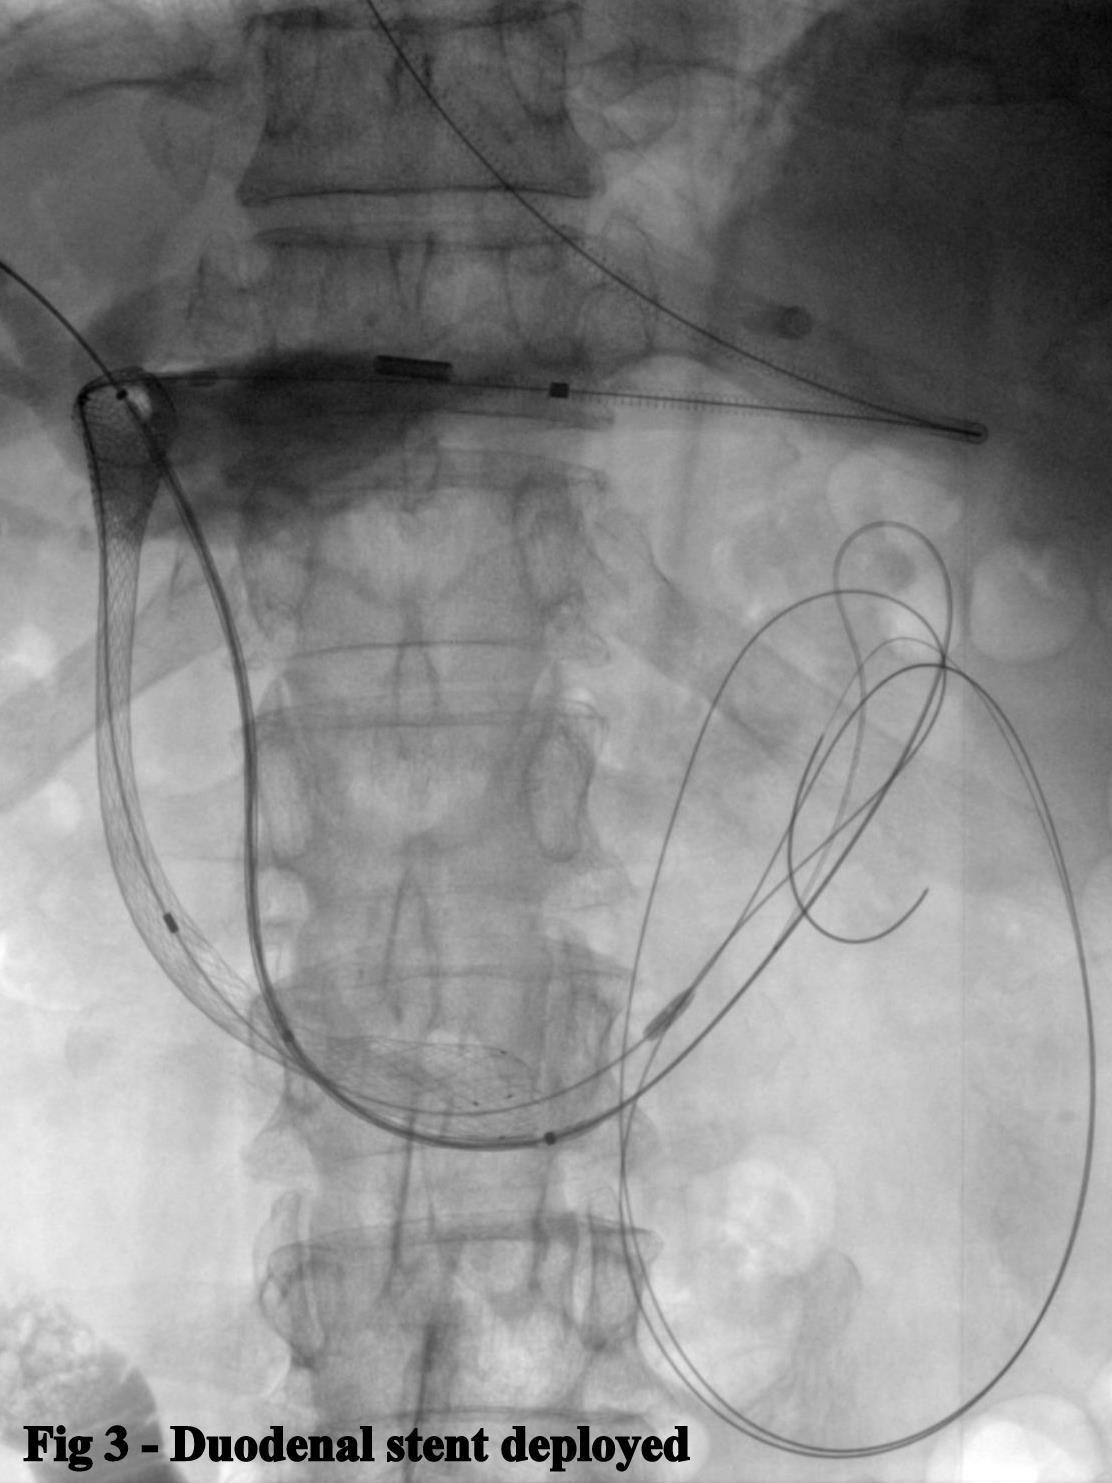 Fig 3. Duodenal stent deployed